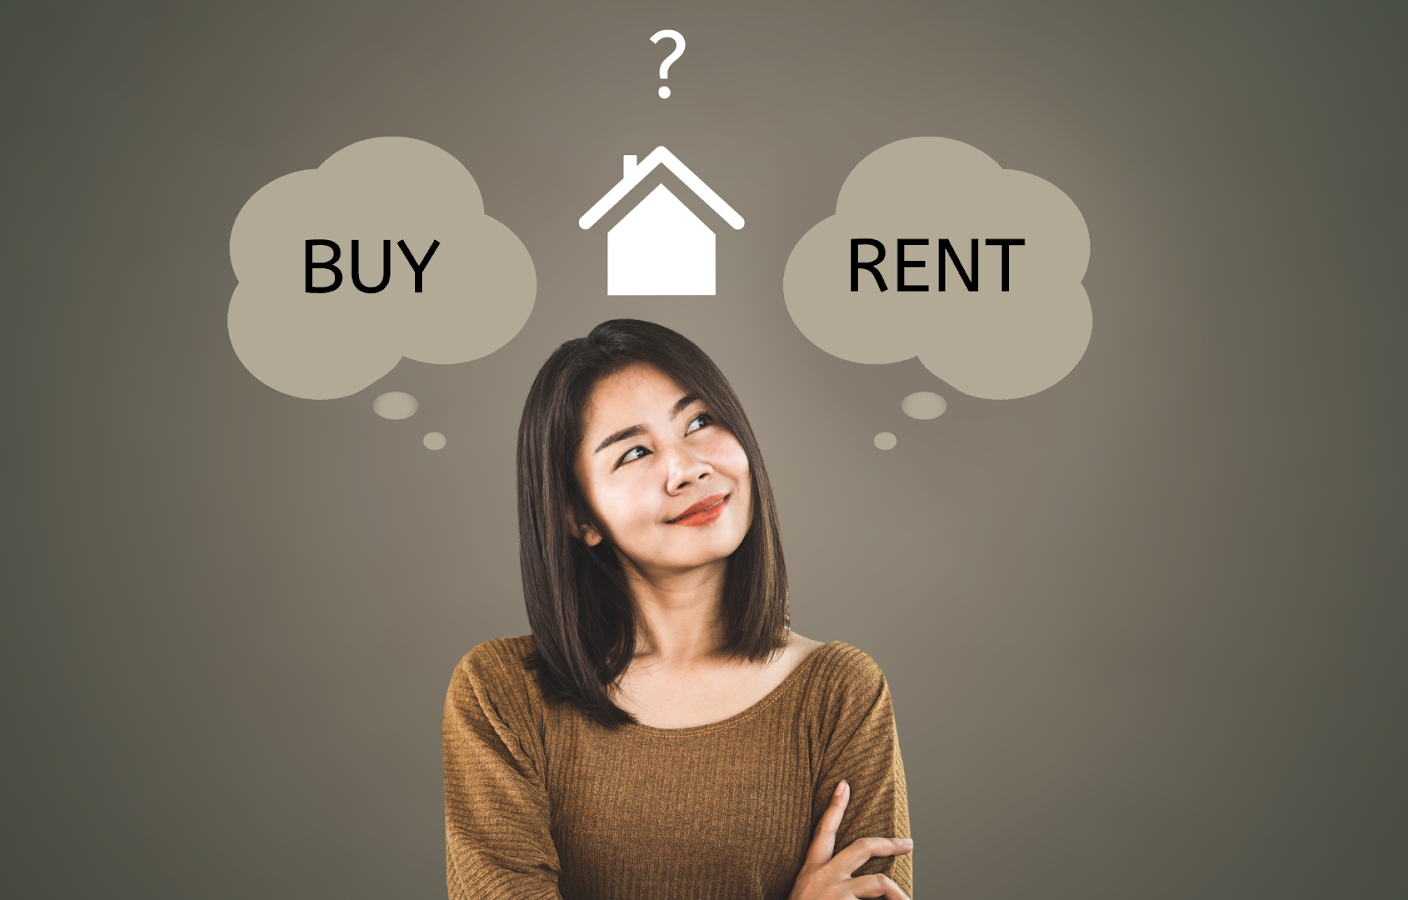 Women thinking of buying or renting house